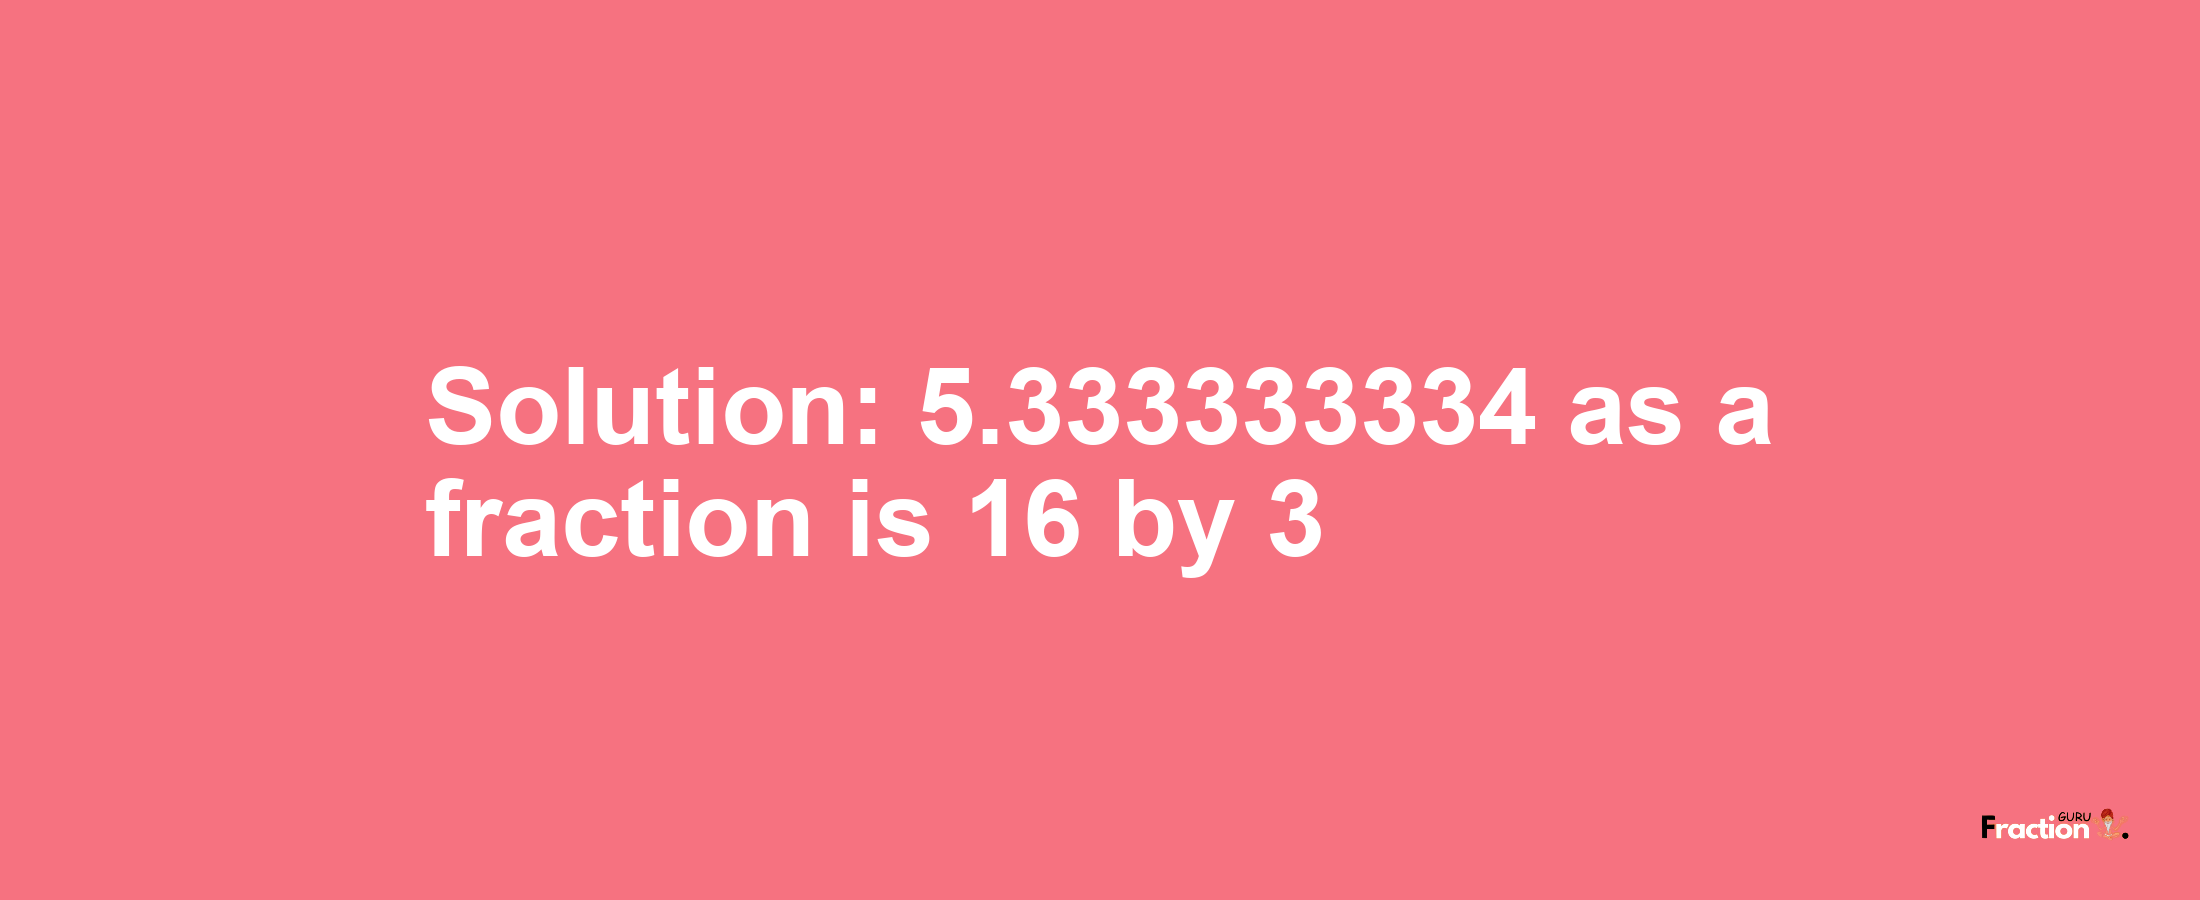 Solution:5.333333334 as a fraction is 16/3